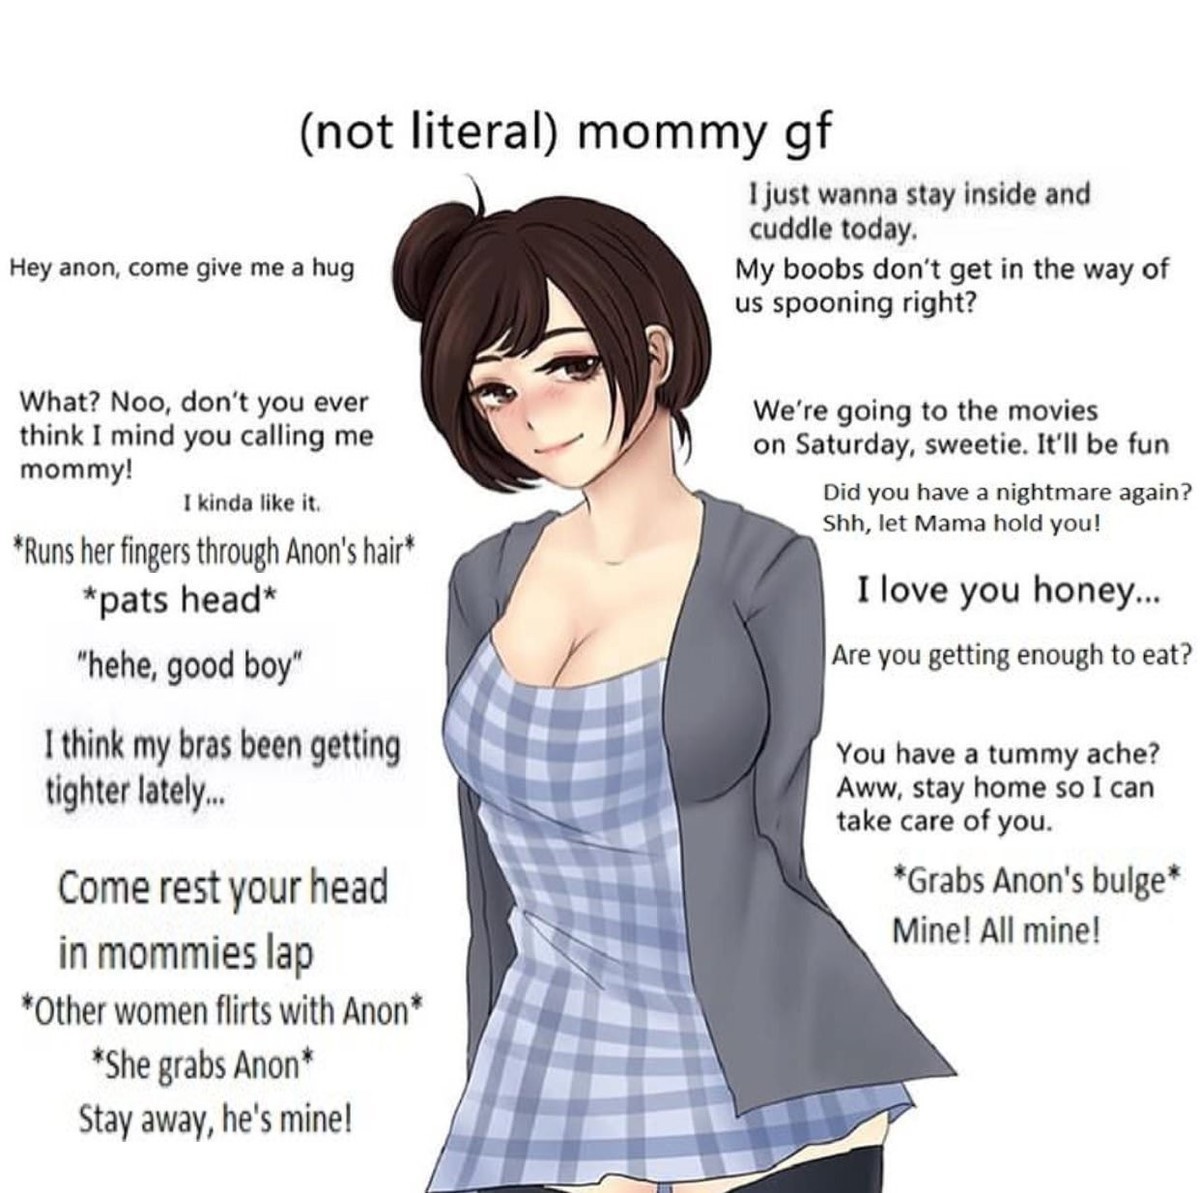 Have you ever had a milf